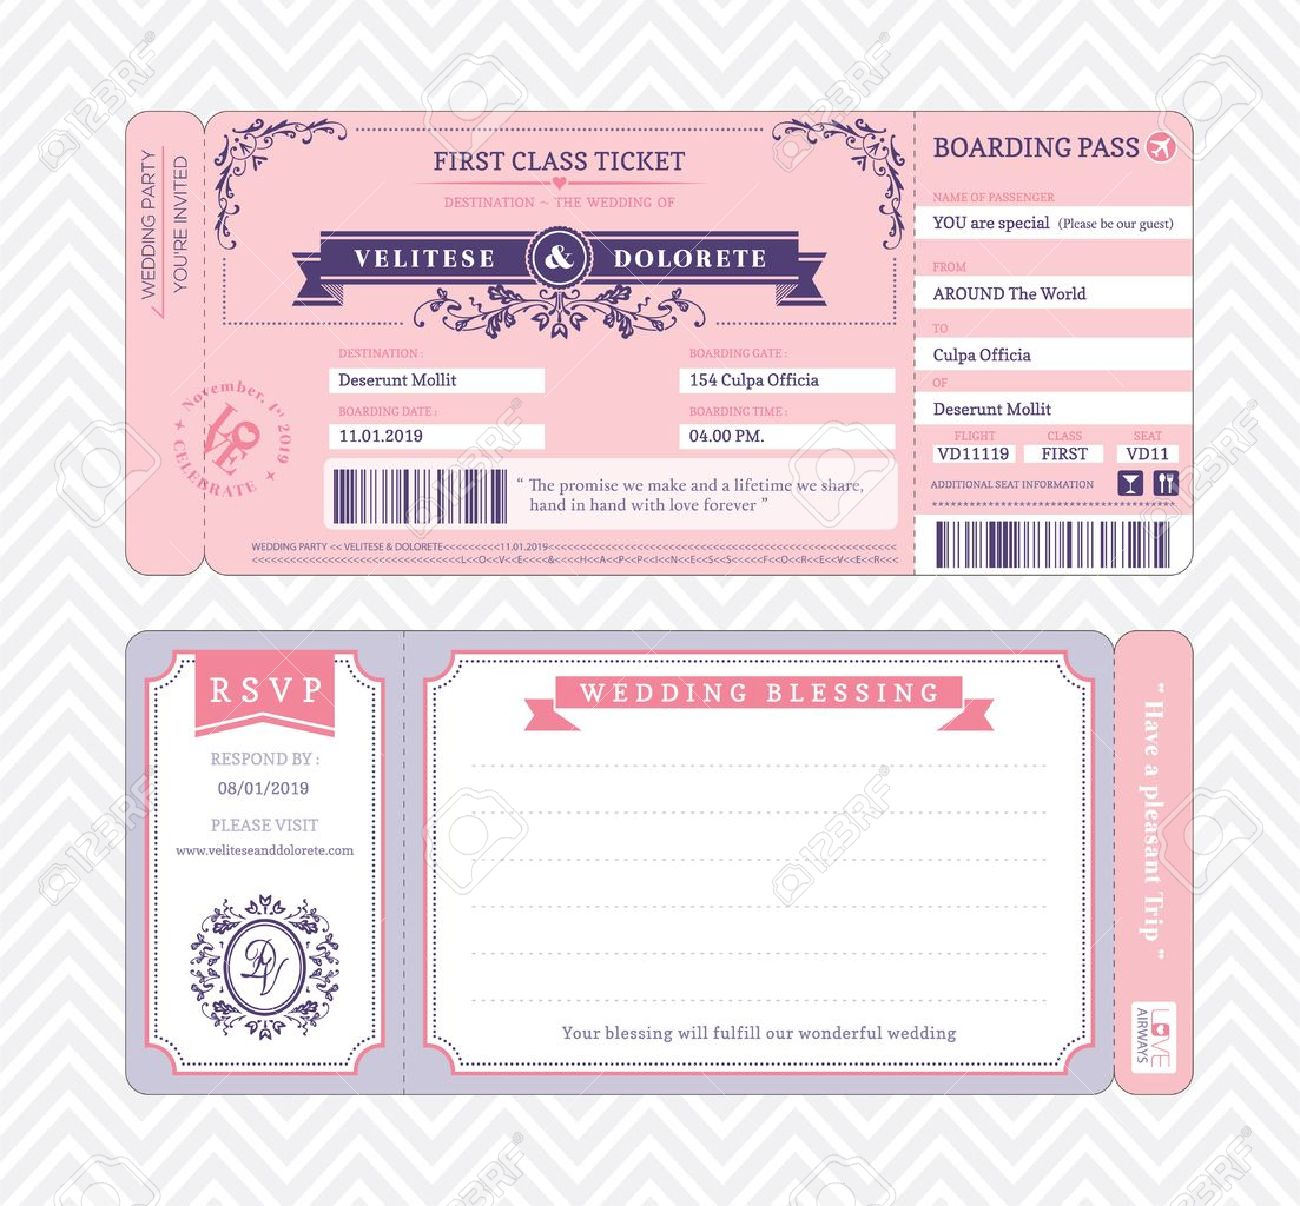 Boarding Pass Ticket Wedding Invitation Template Royalty Free throughout dimensions 1300 X 1206